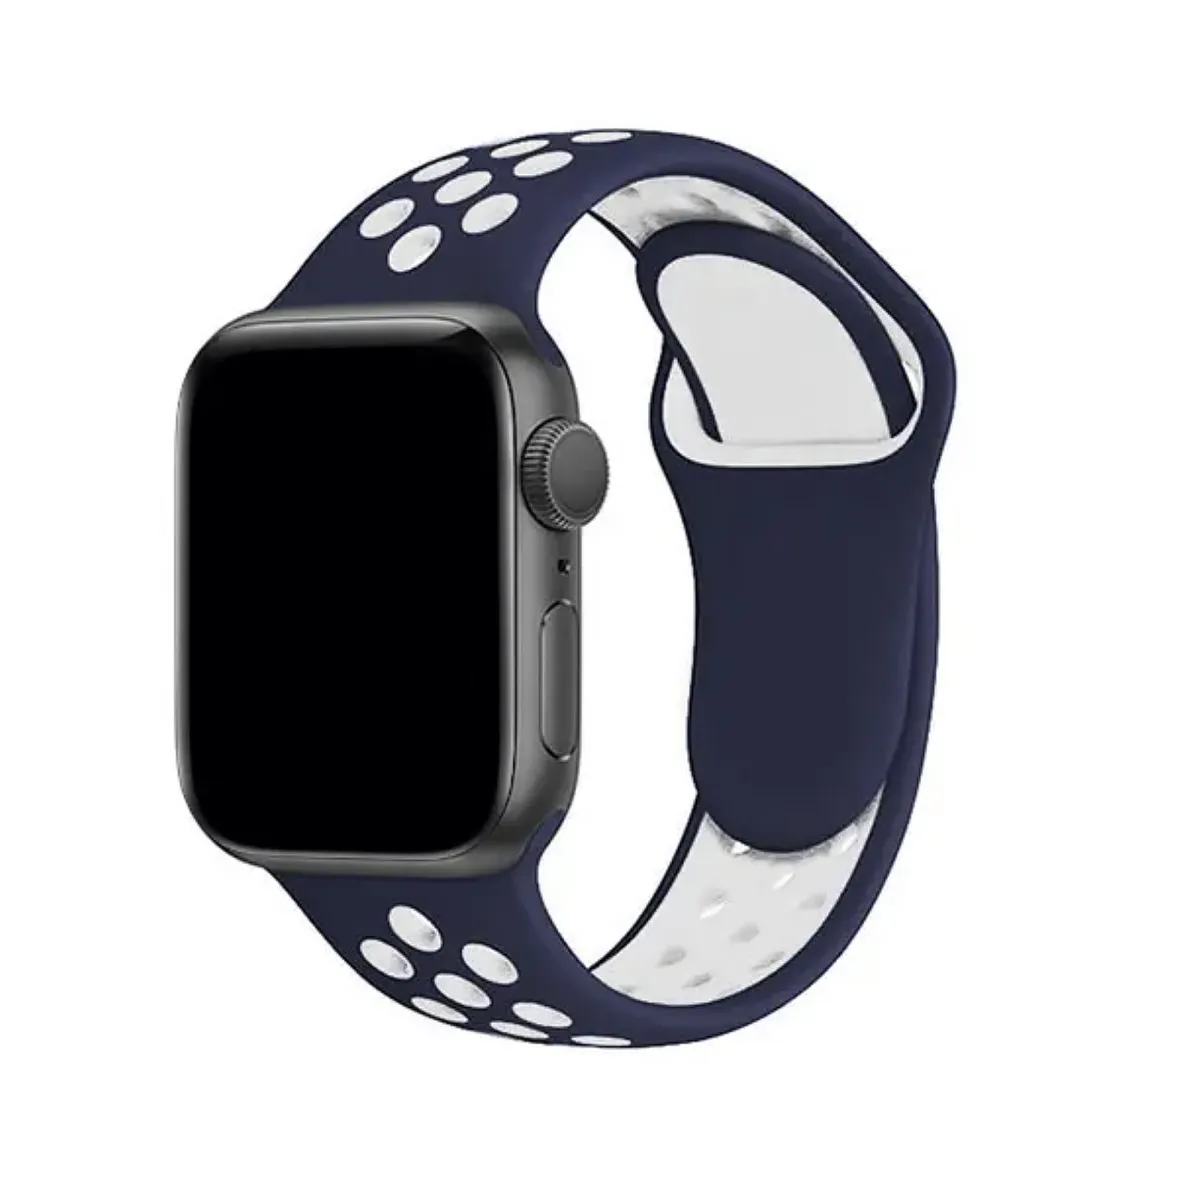 Stainless Steel Apple Watch Bands - The Salty Fox